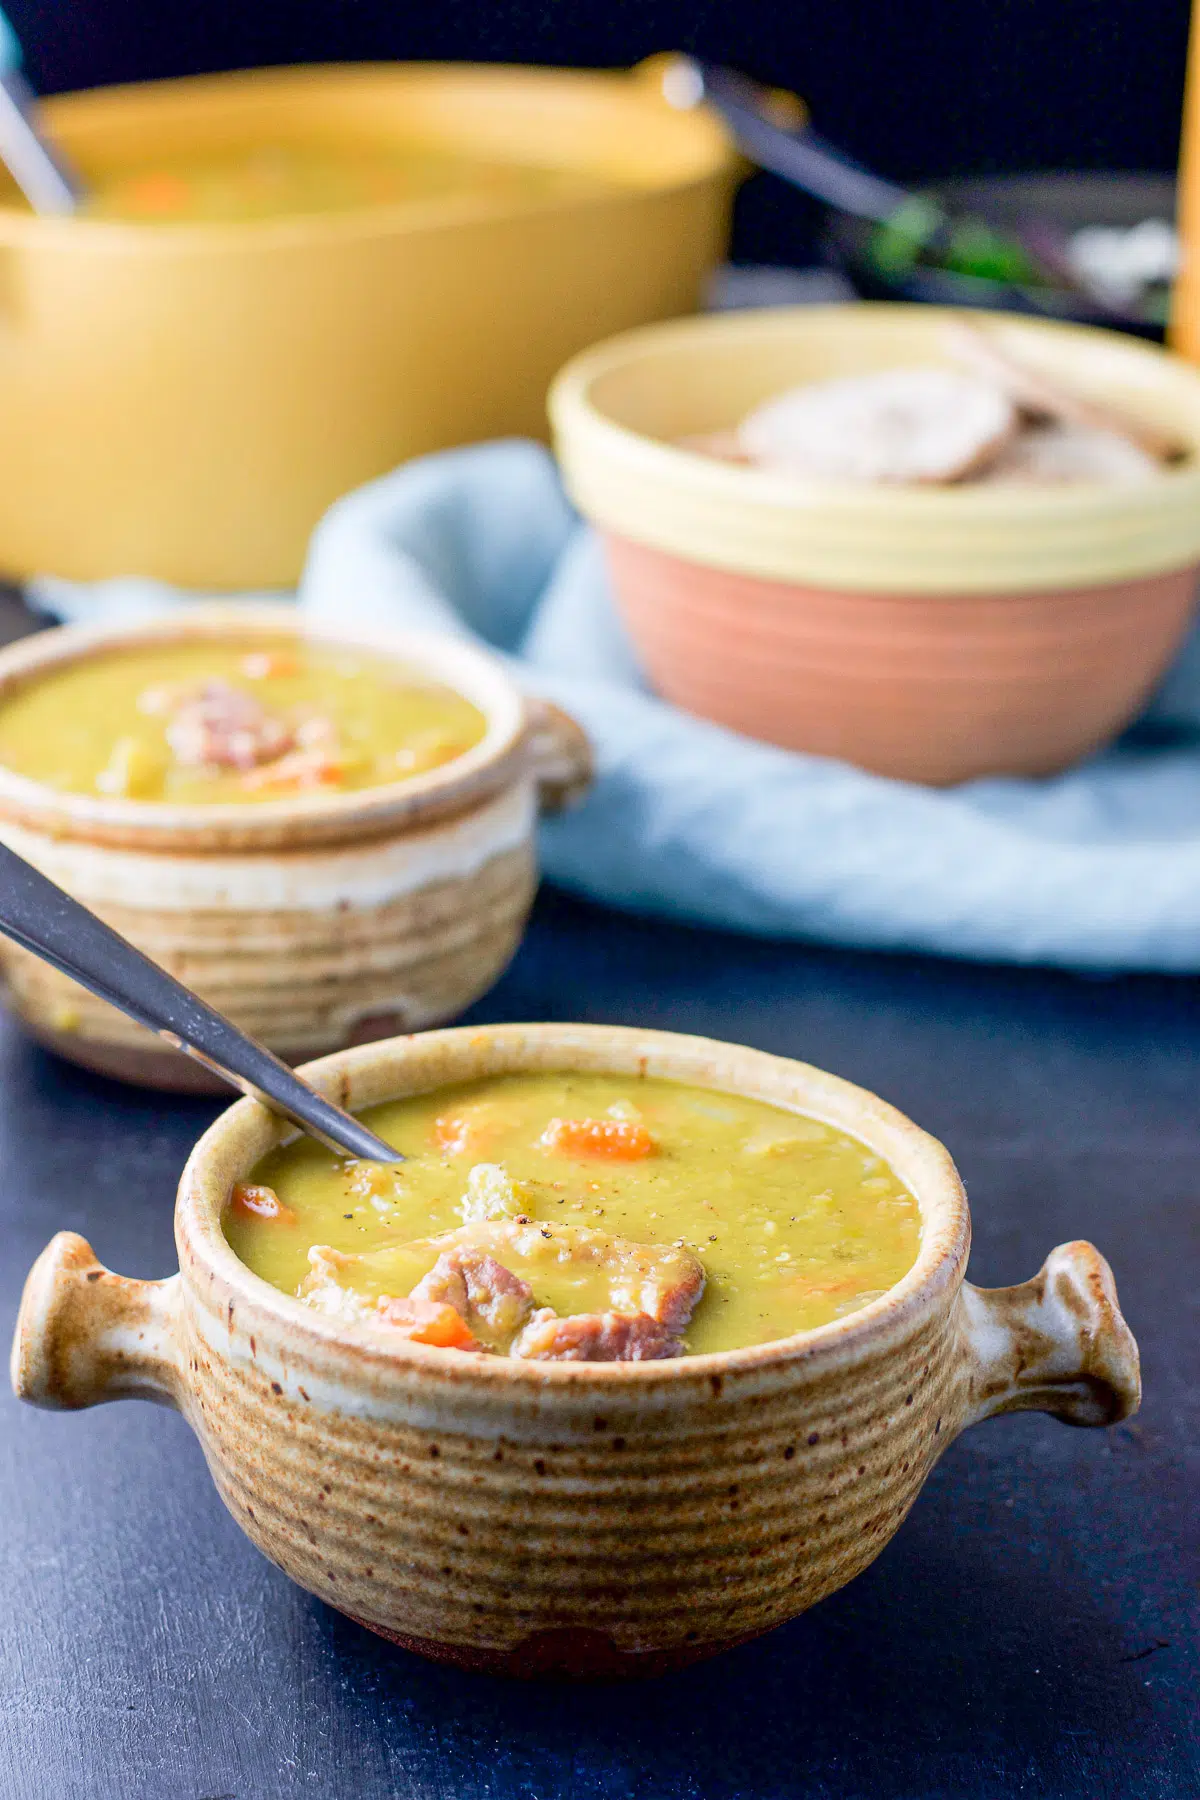 two crocks filled with the pea soup with pita and the serving bowl